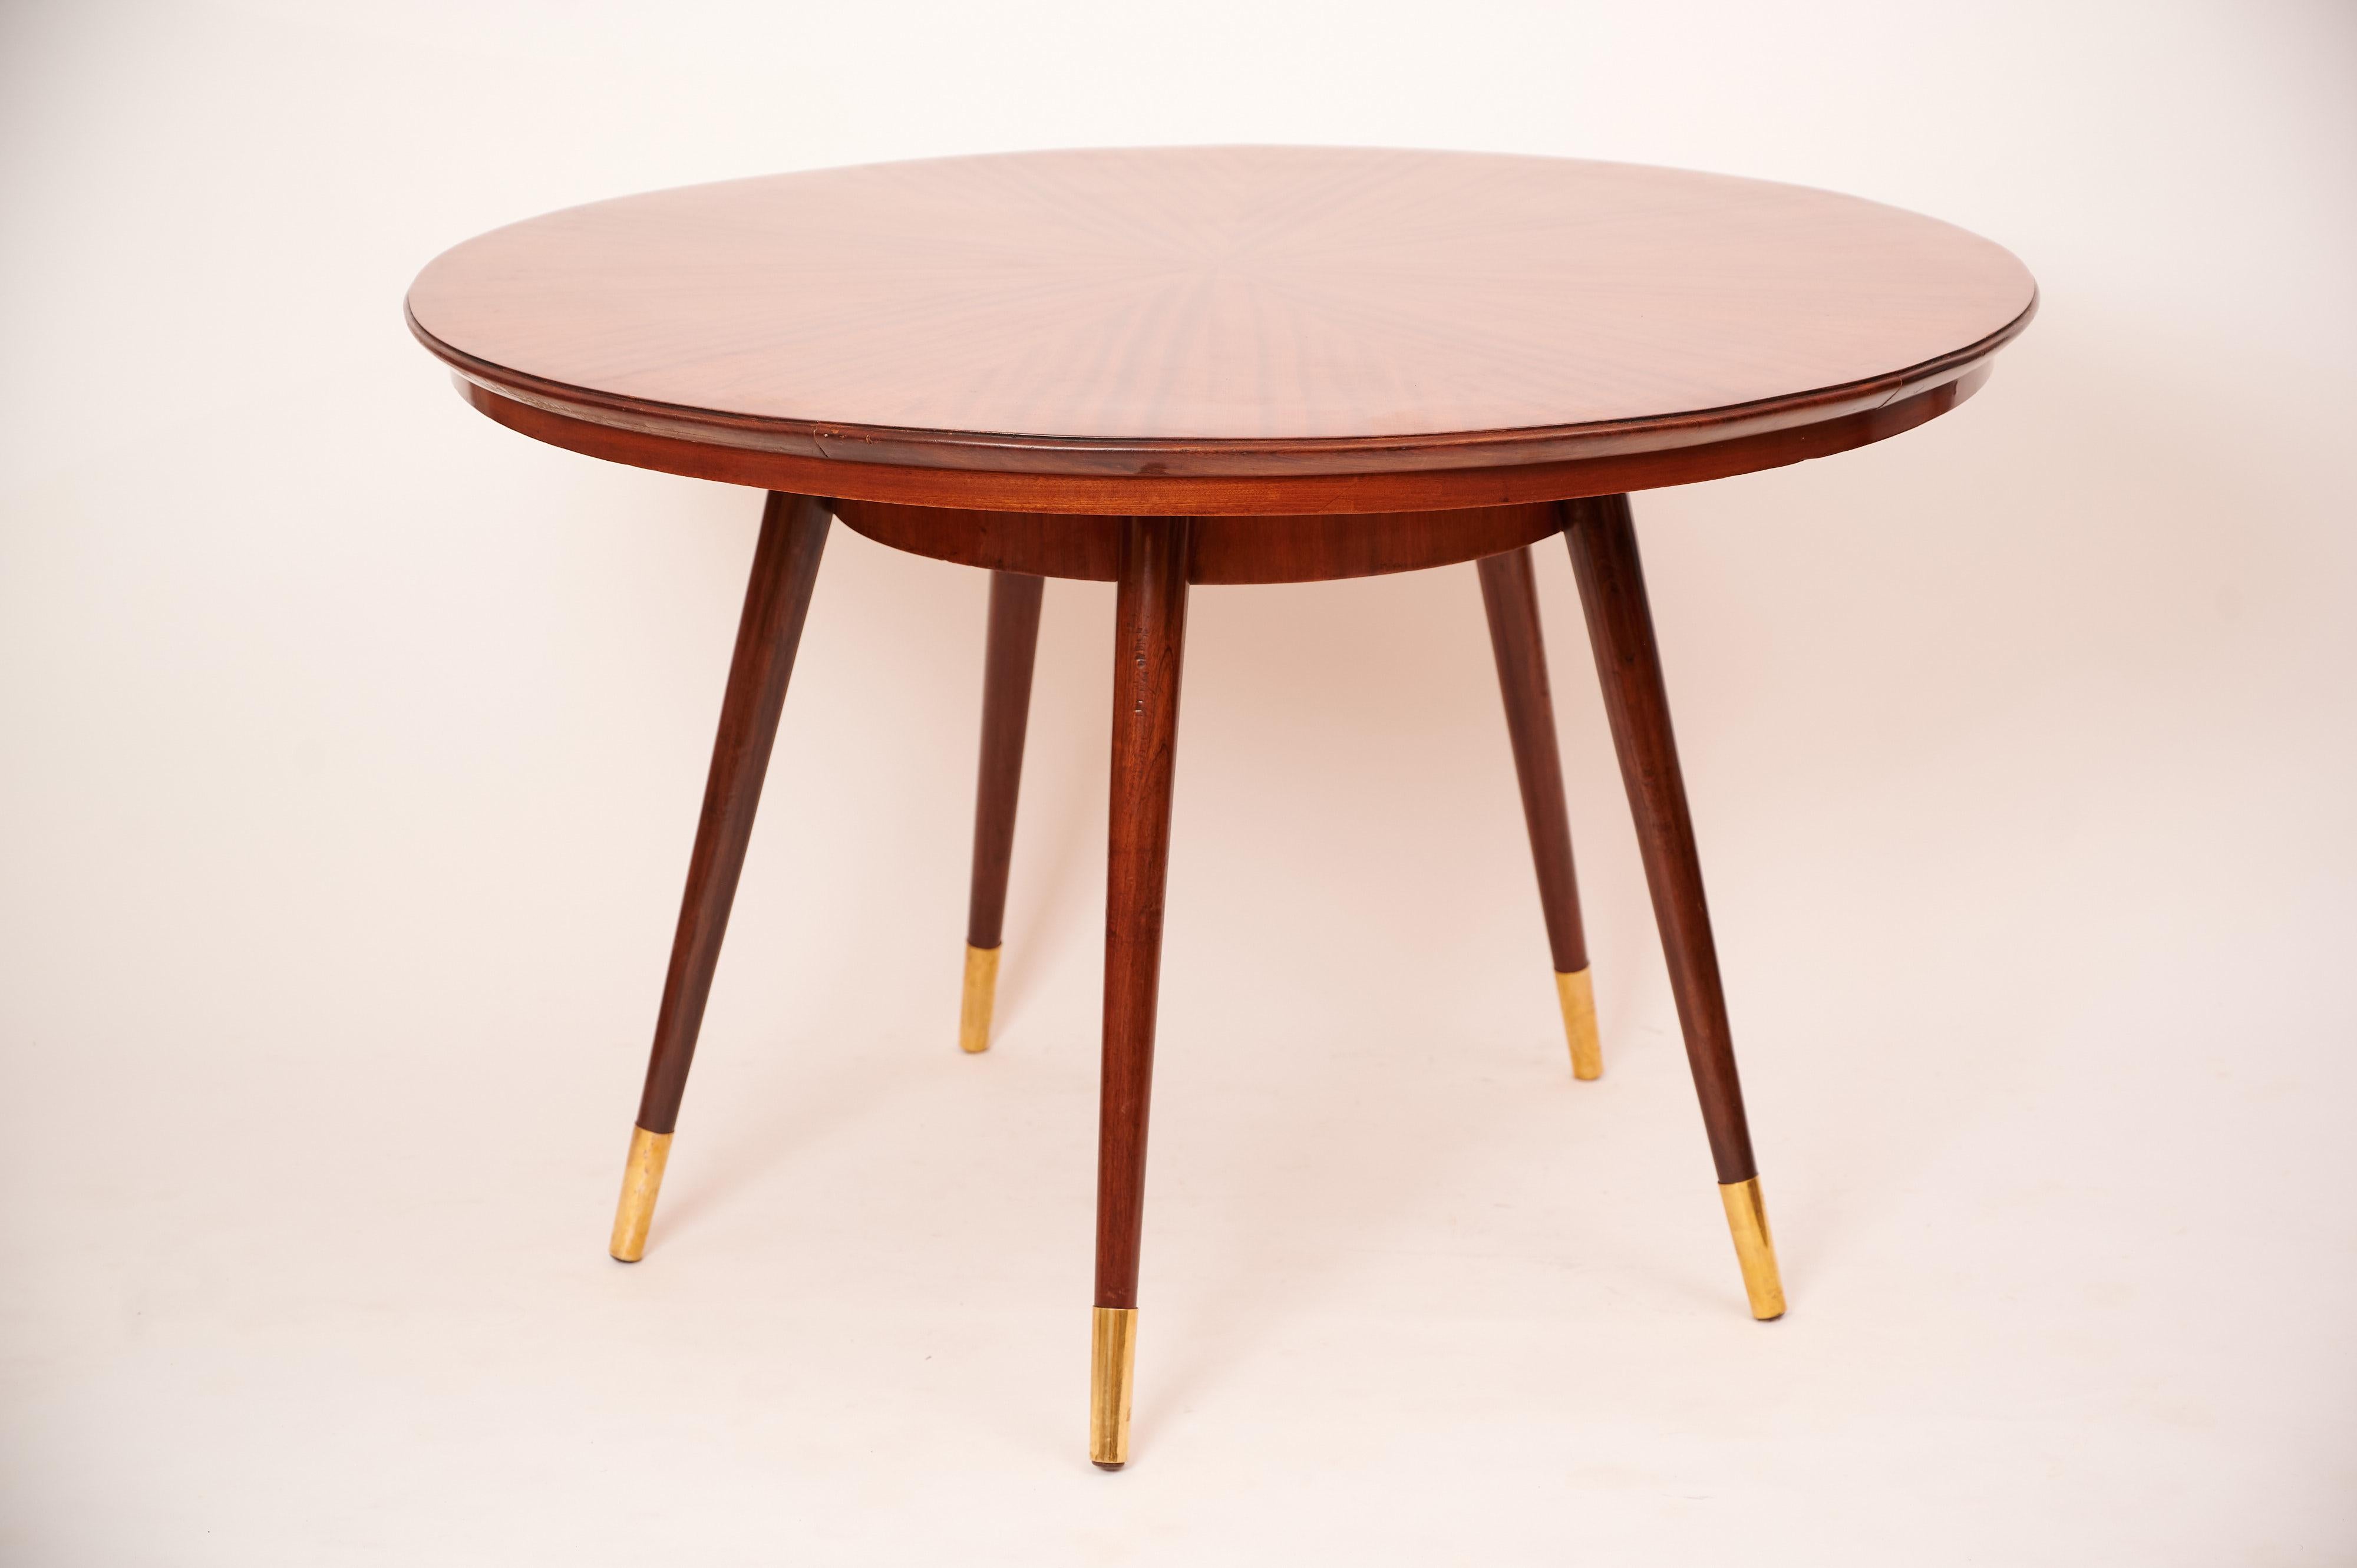 Elegantly designed circular centre table in the style of Gio Ponti c1950

Exotic wood marquetry on the table top with brass sabots on each leg.

Sympathetically restored.

 